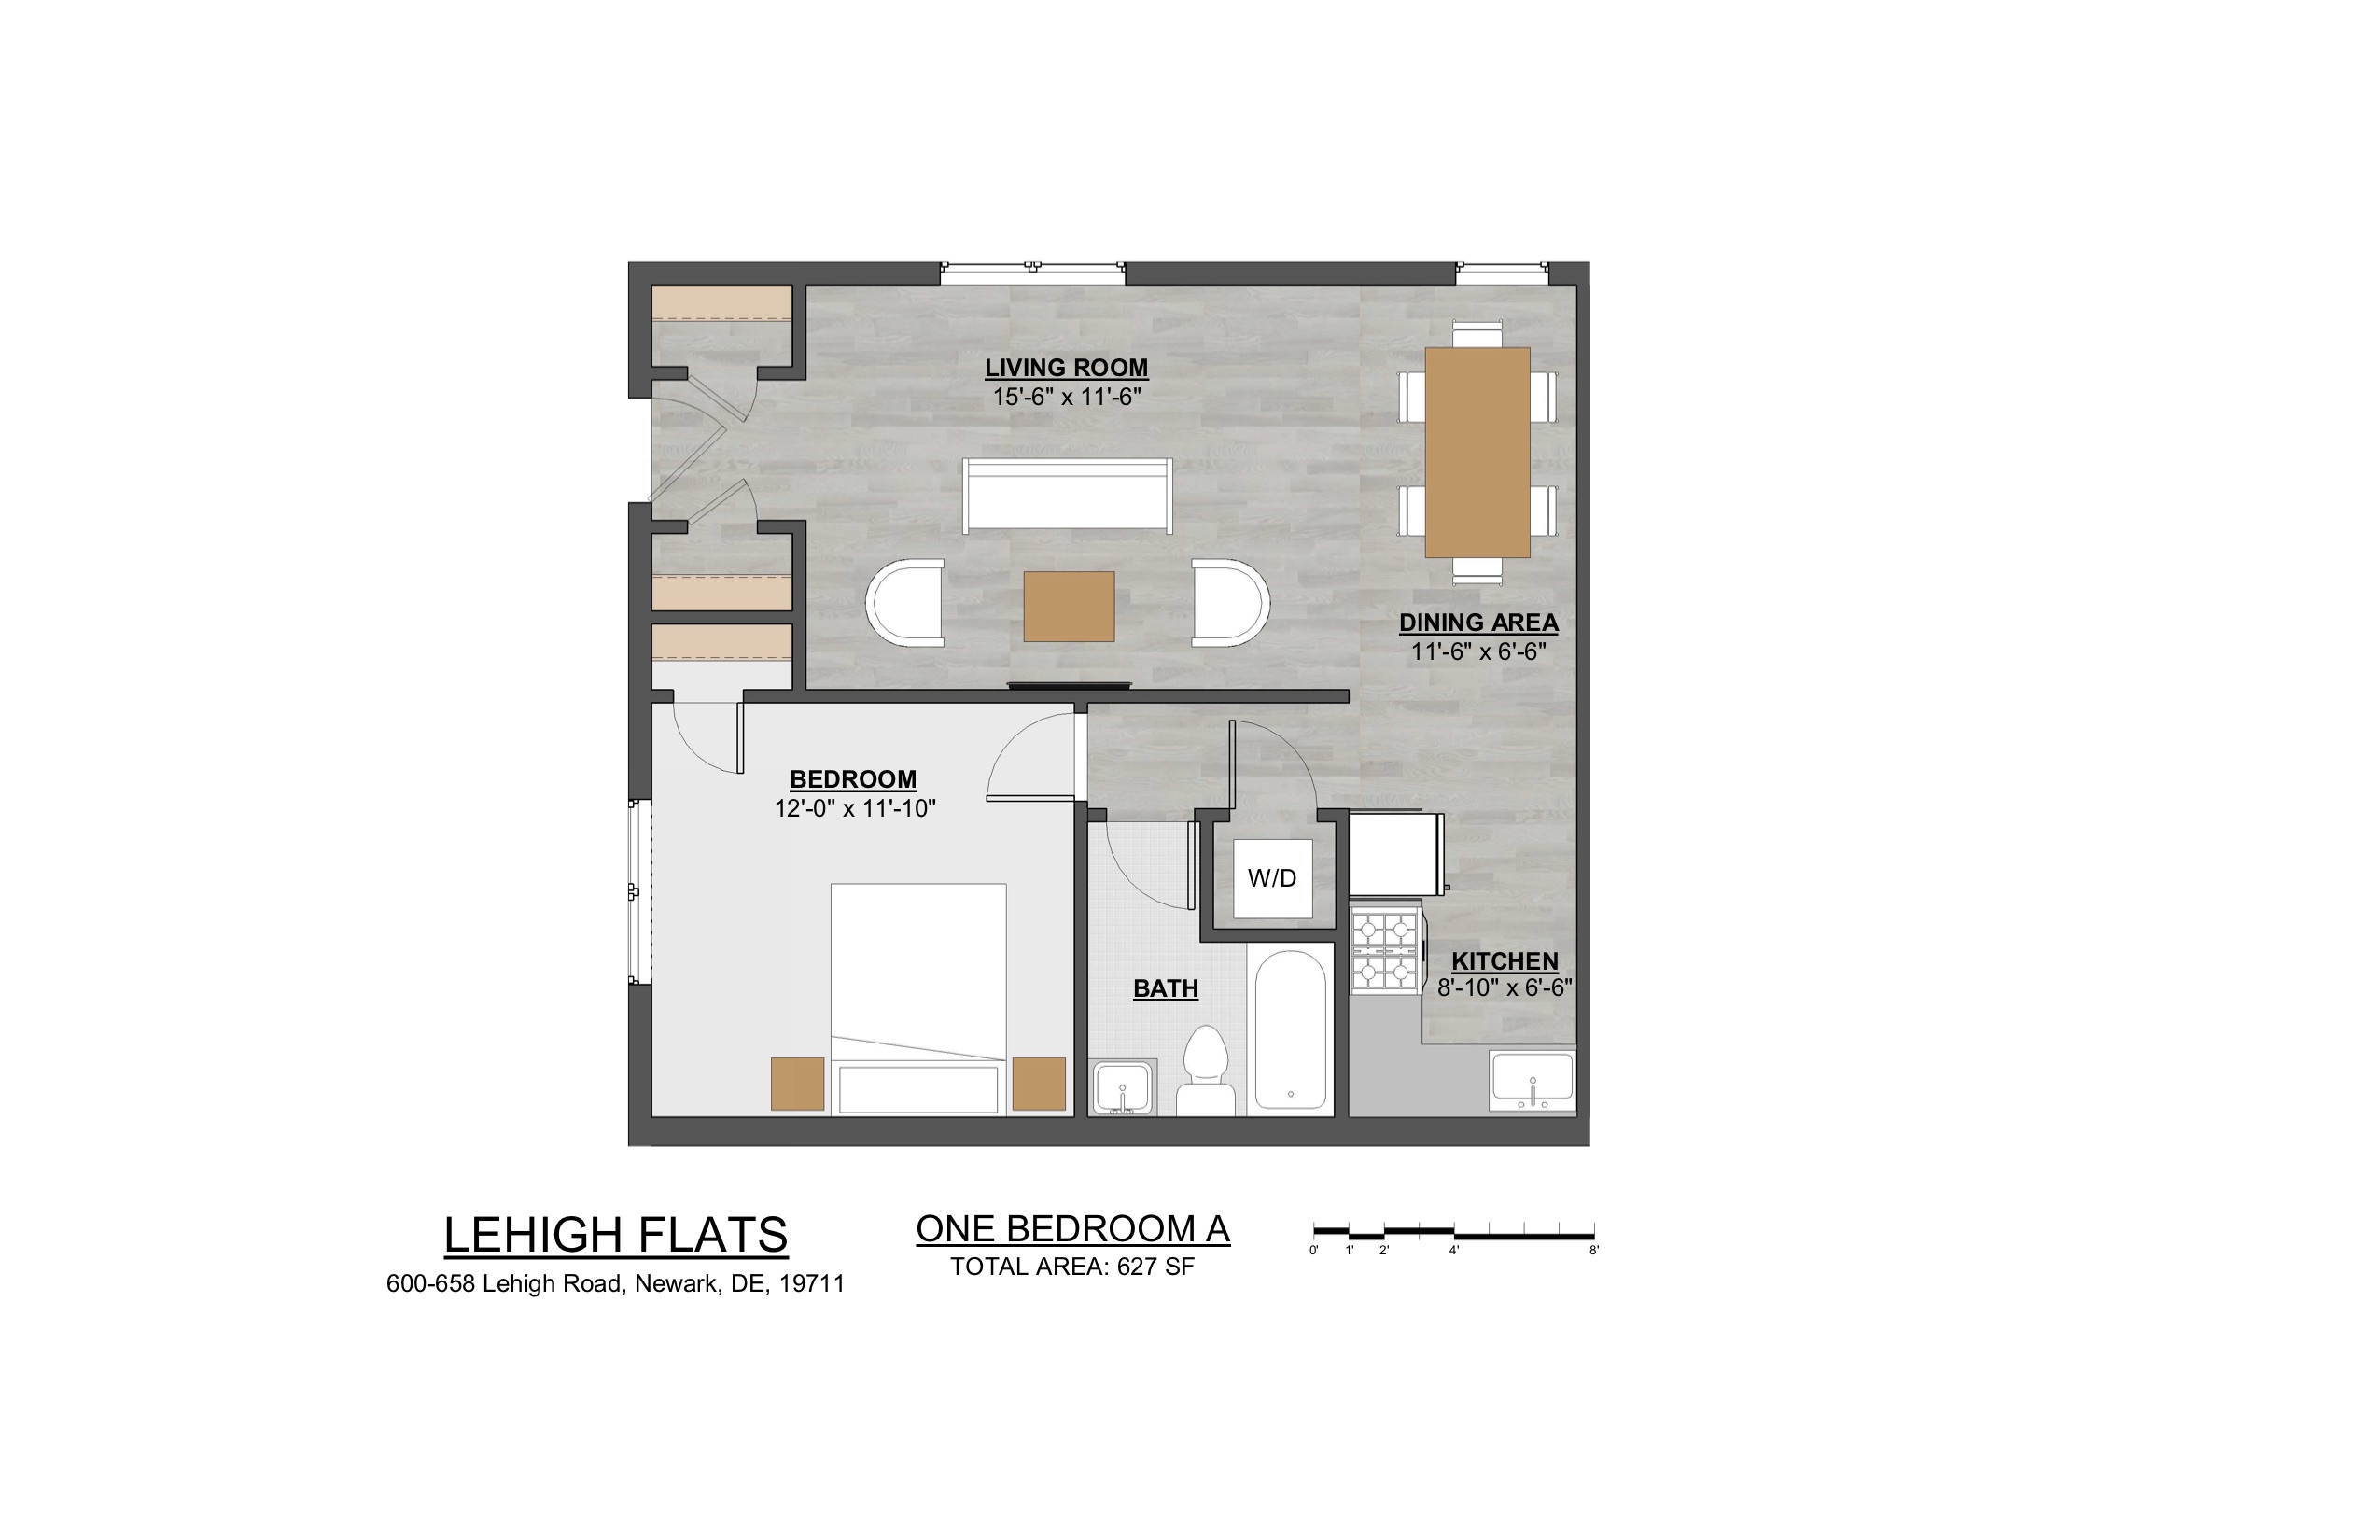 One Bedroom Jr. A 627 Square Feet